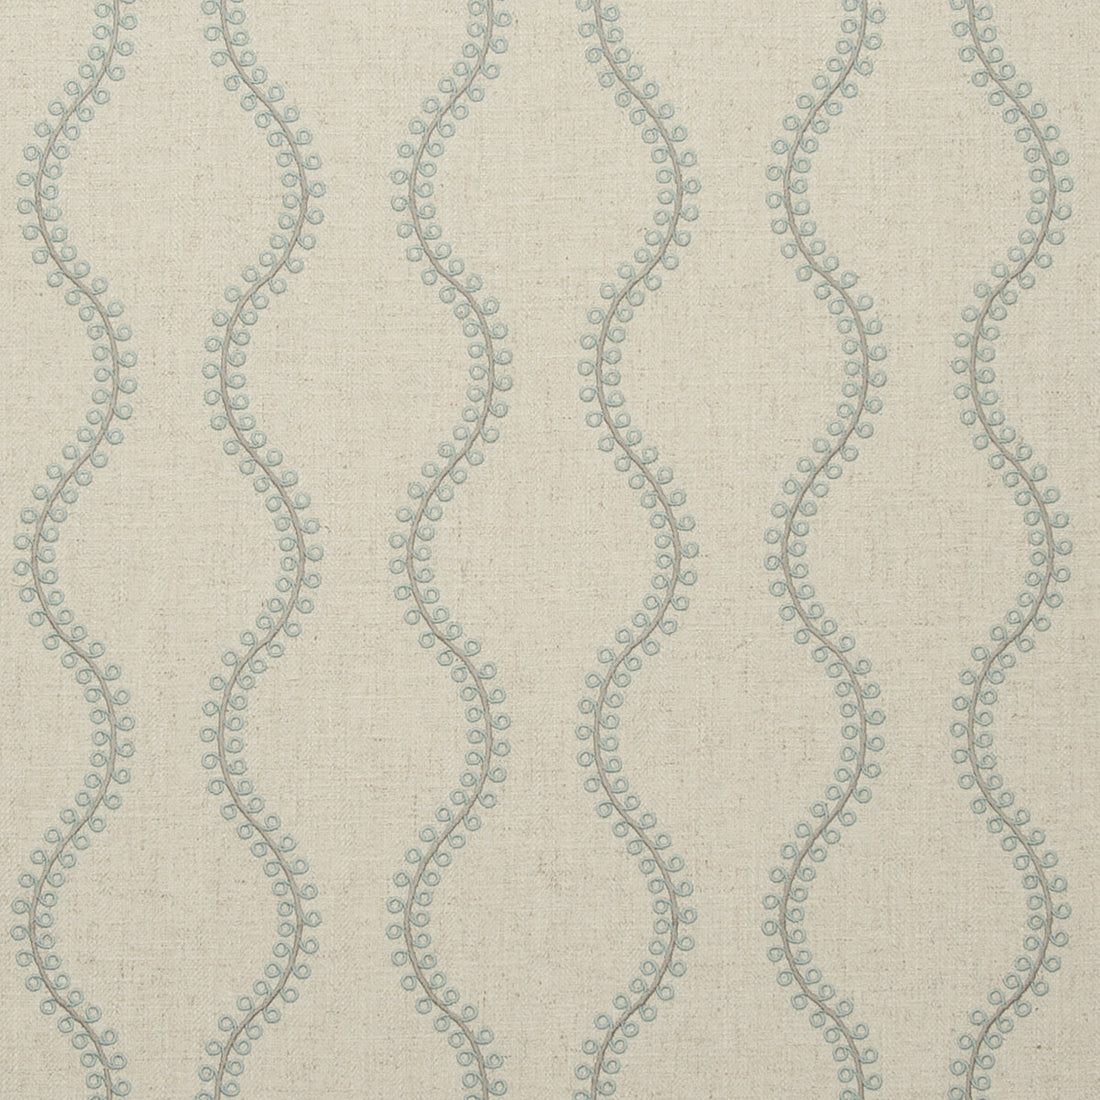 Woburn fabric in duckegg color - pattern F0741/04.CAC.0 - by Clarke And Clarke in the Clarke &amp; Clarke Manor House collection